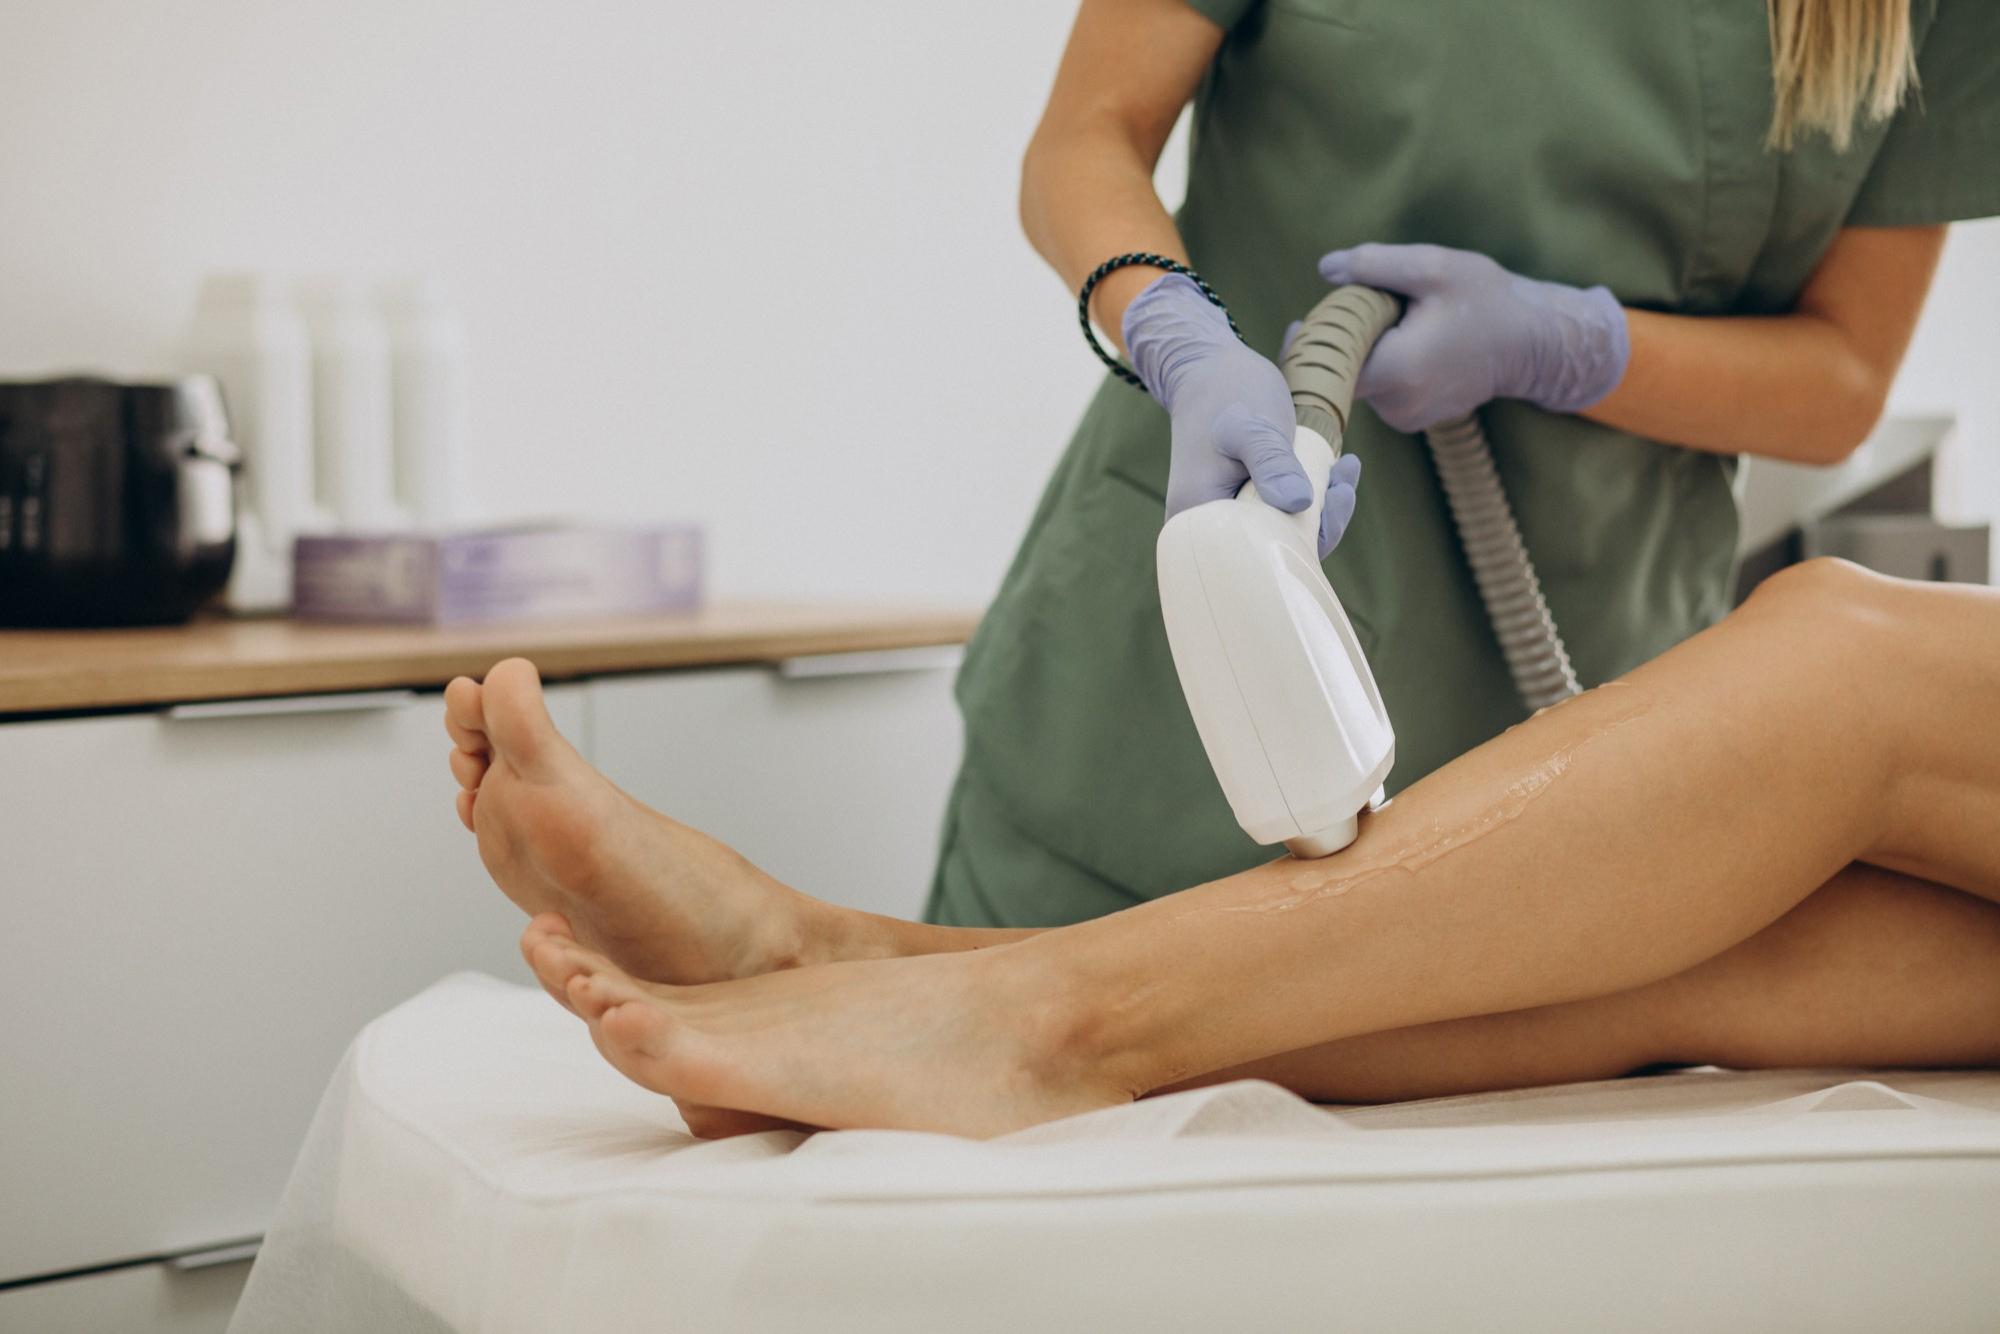 Laser Hair Removal: What To Know And Expect